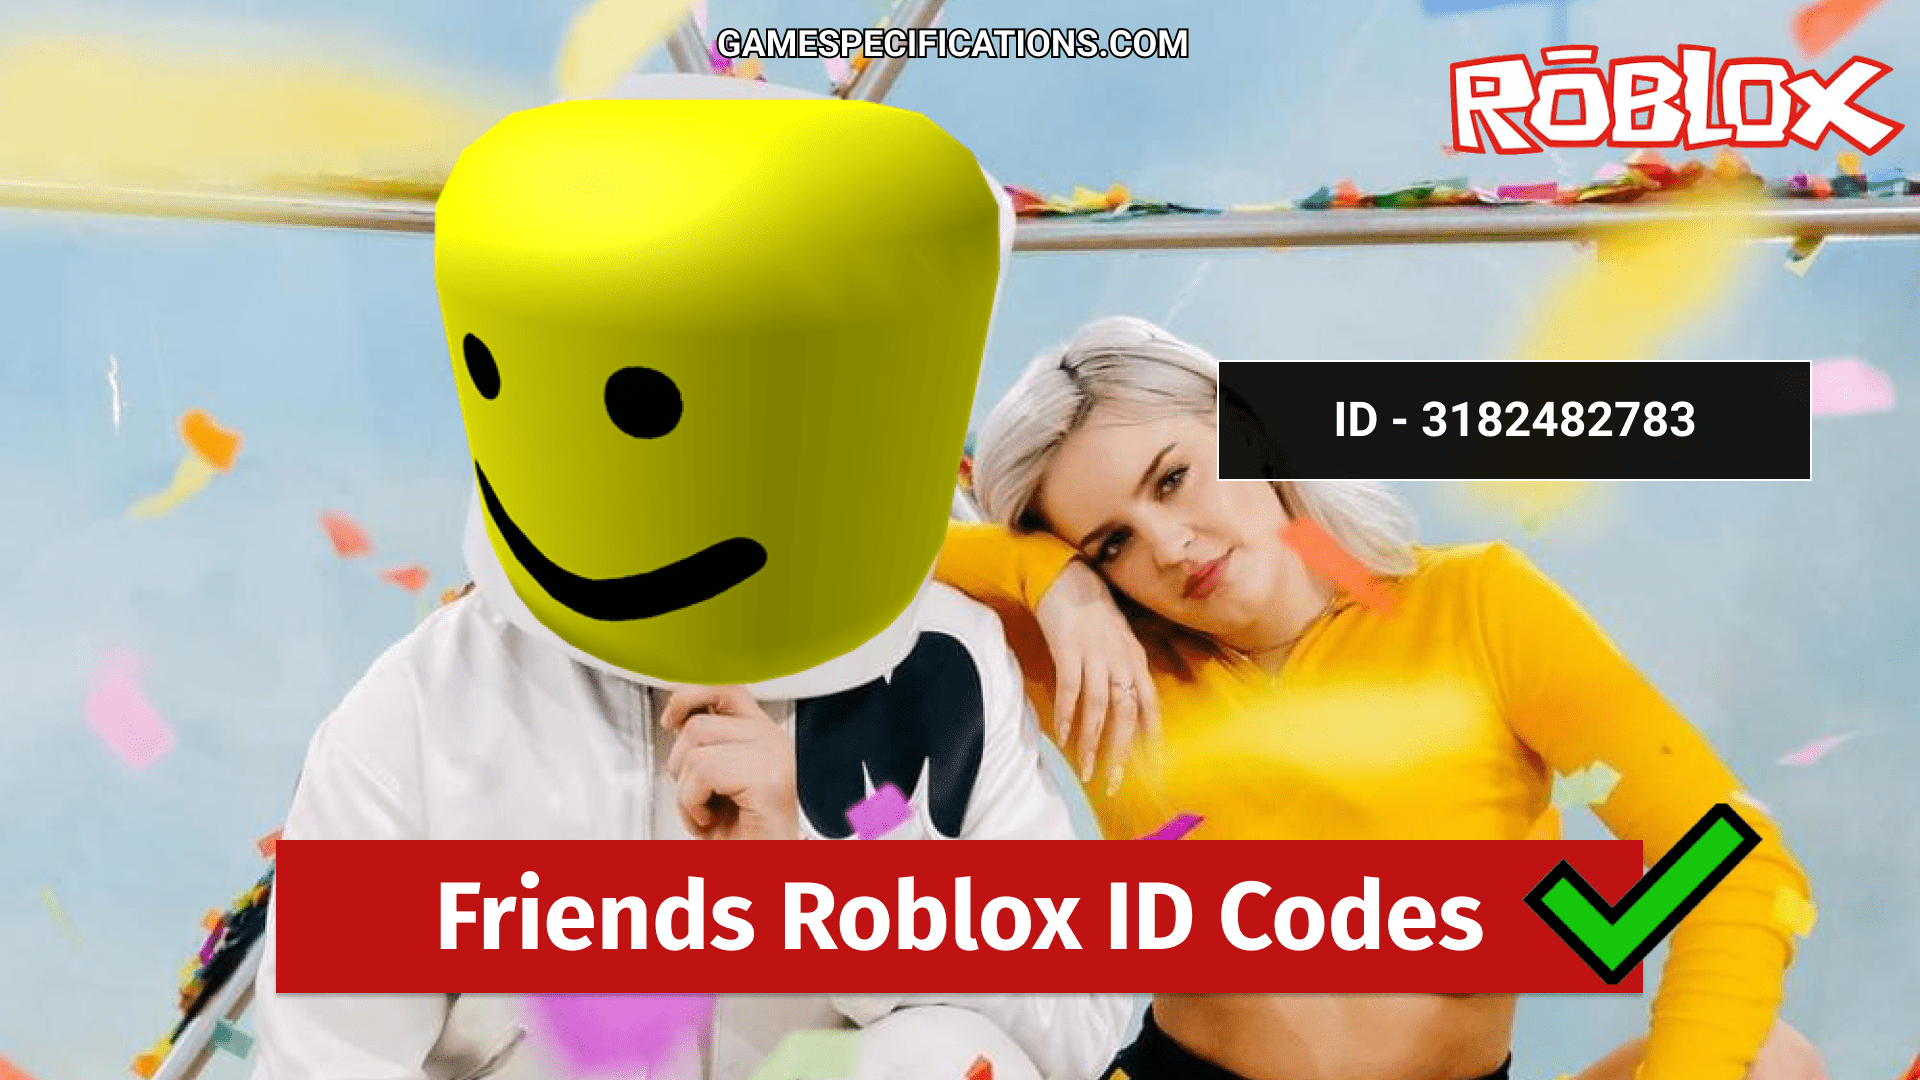 Friends Roblox Id Codes From Marshmello 2021 Game Specifications - friends theme song roblox